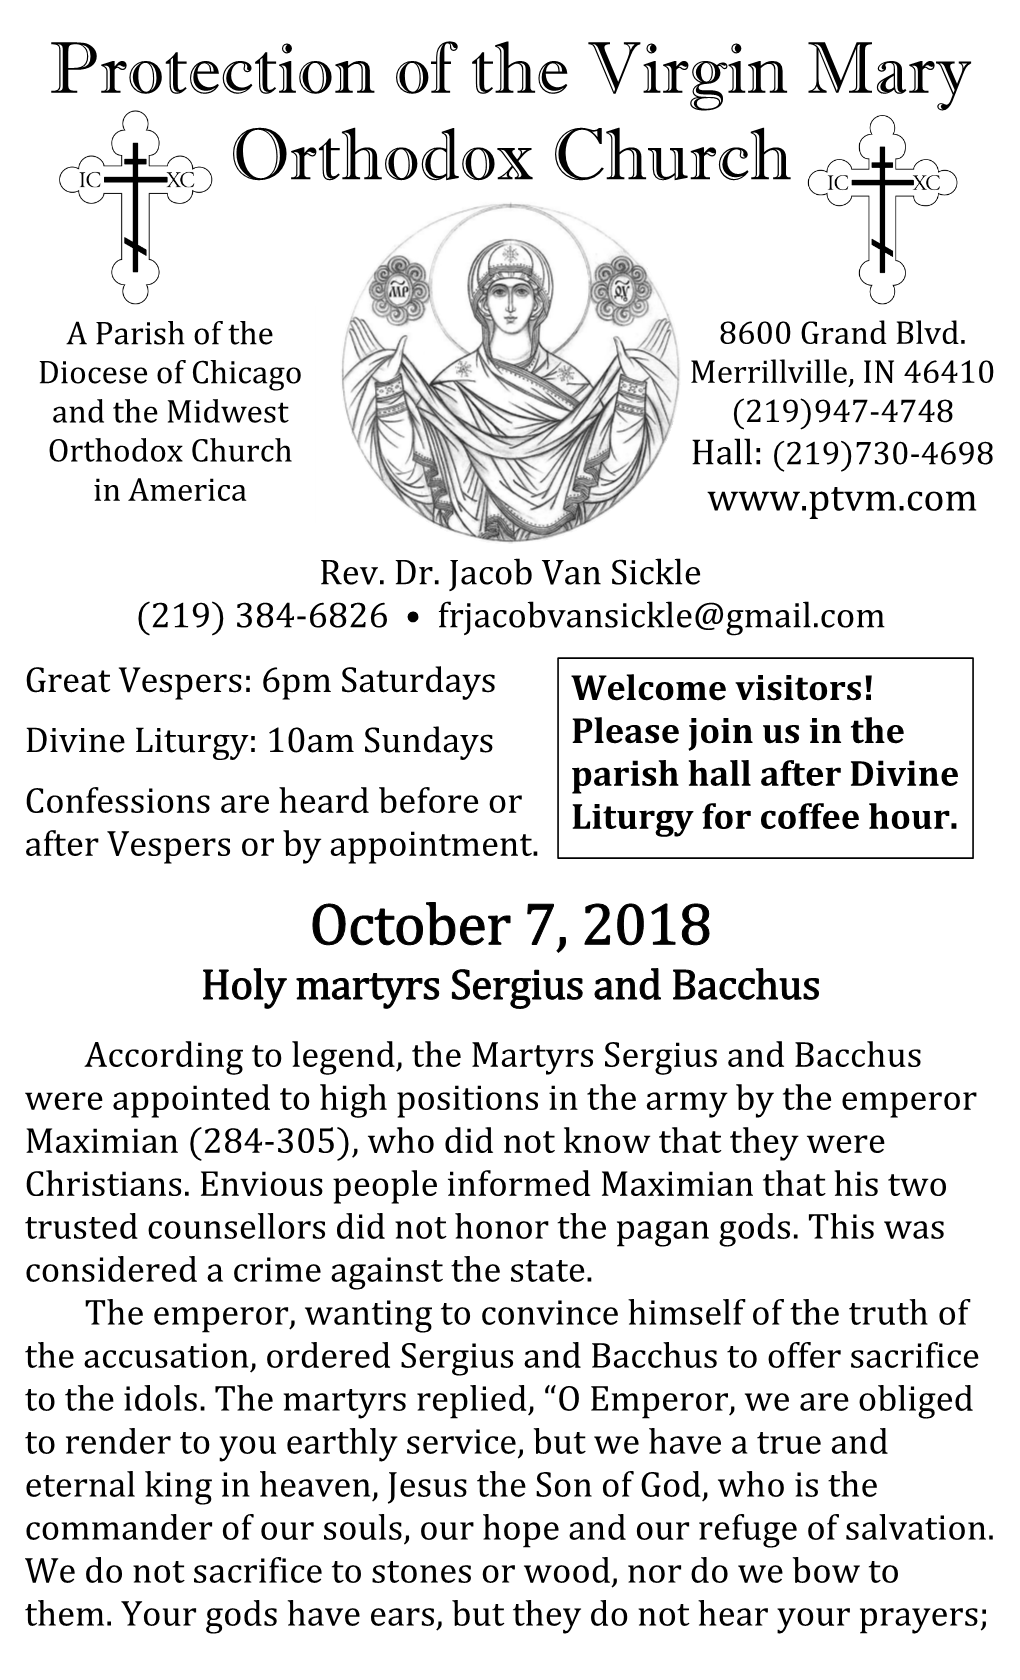 October 7, 2018 Holy Martyrs Sergius and Bacchus